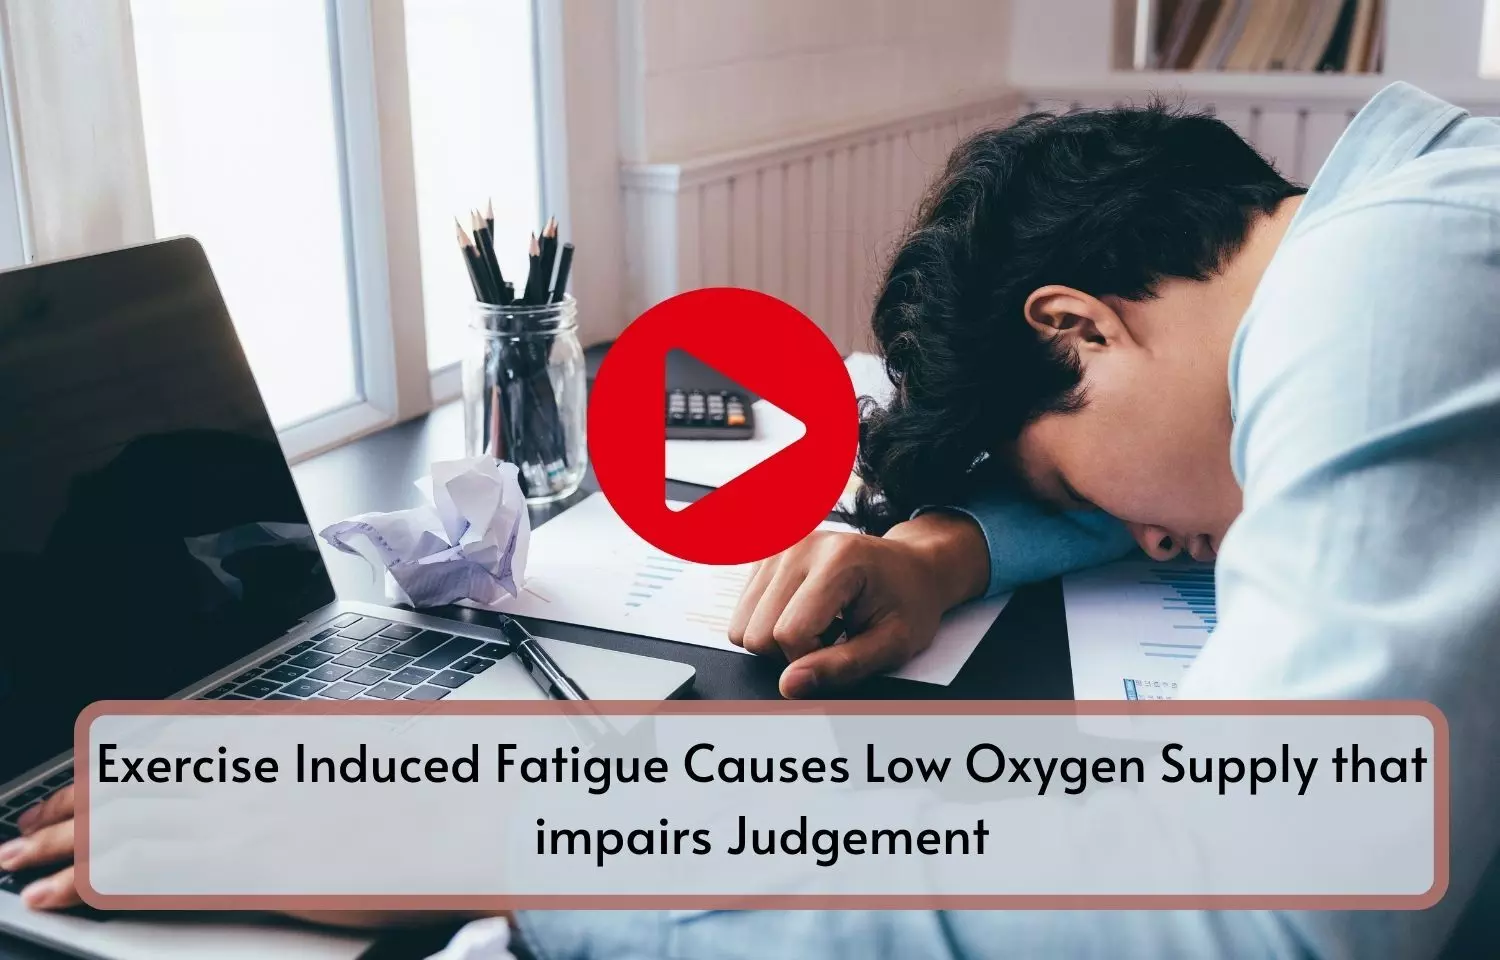 Exercise Induced Fatigue to Cause Low Oxygen Supply that impairs Judgement